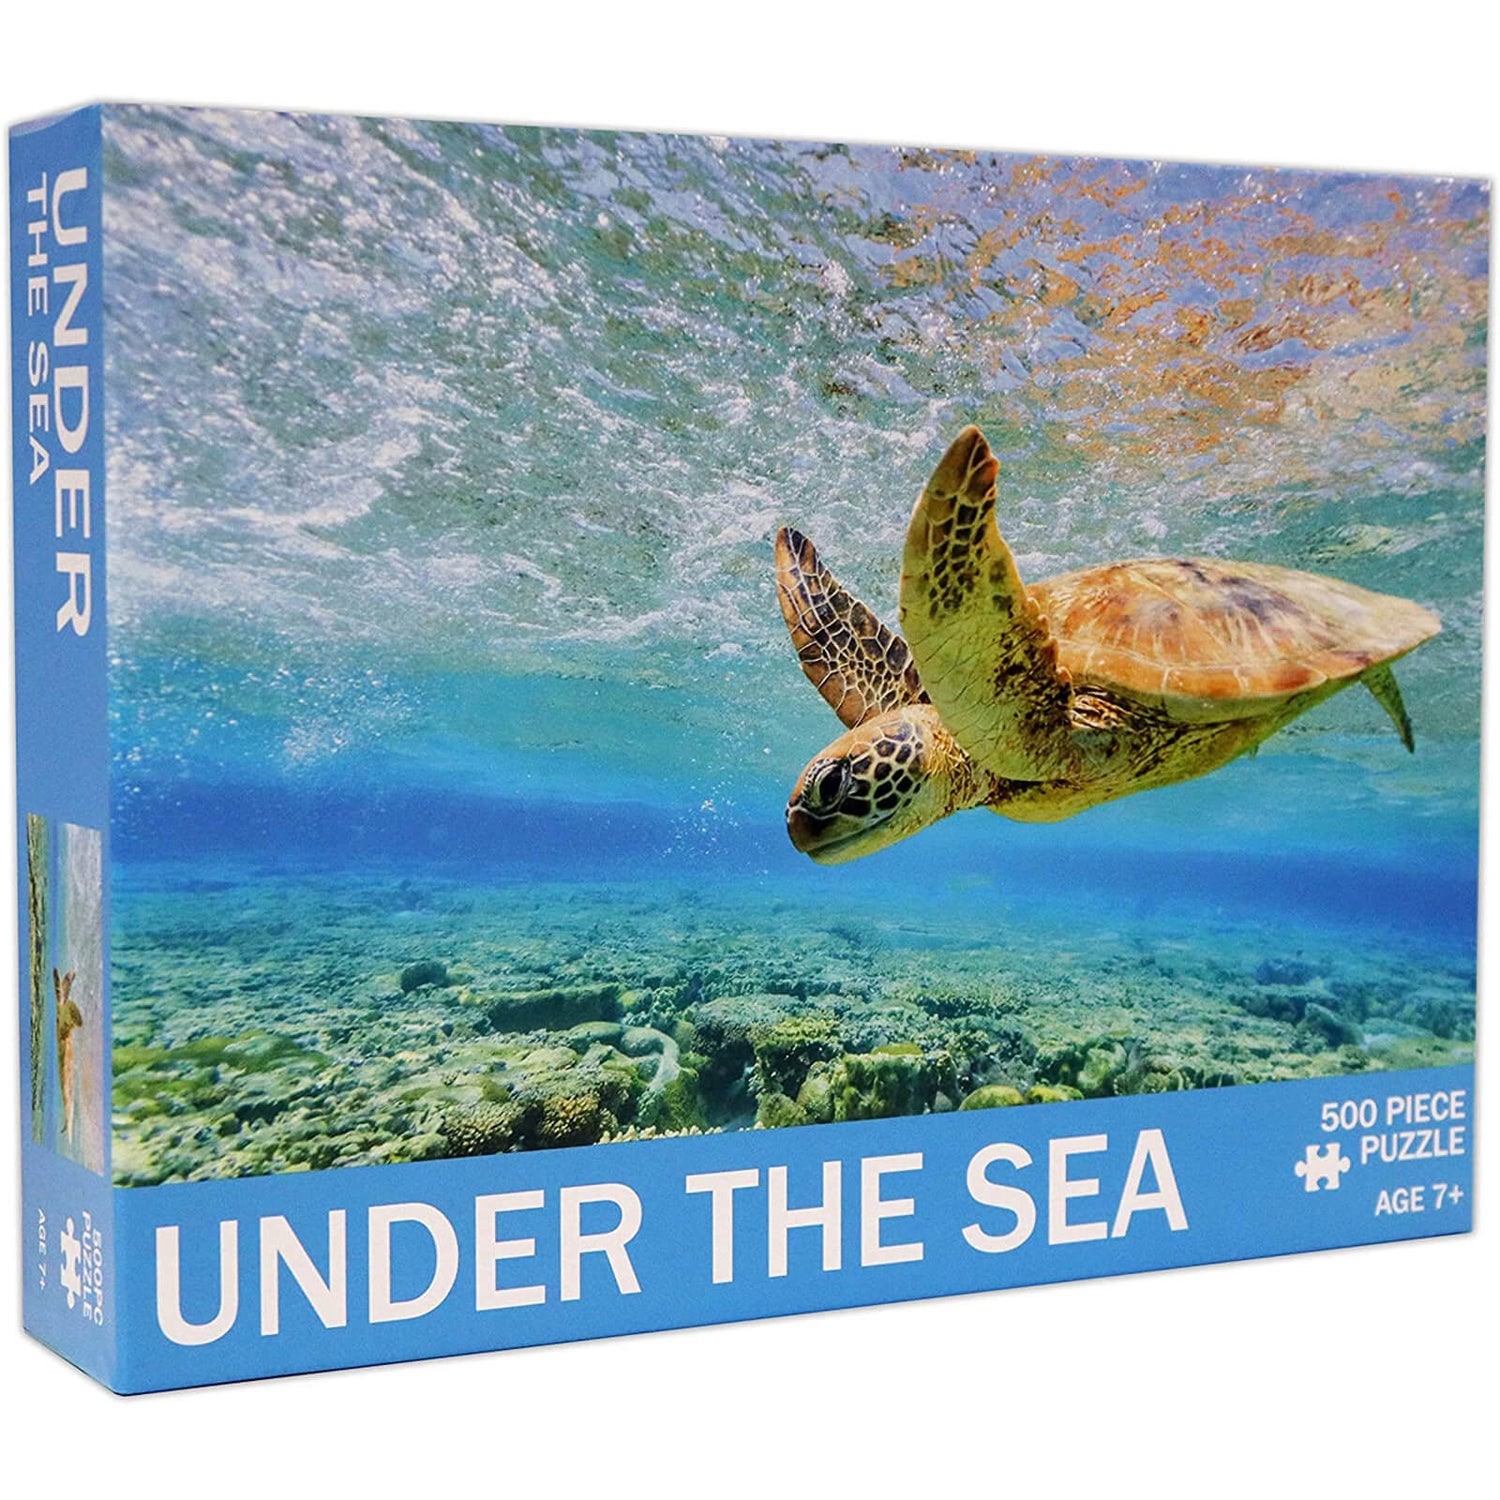 Under the Sea Jigsaw Puzzle (500 Pieces)